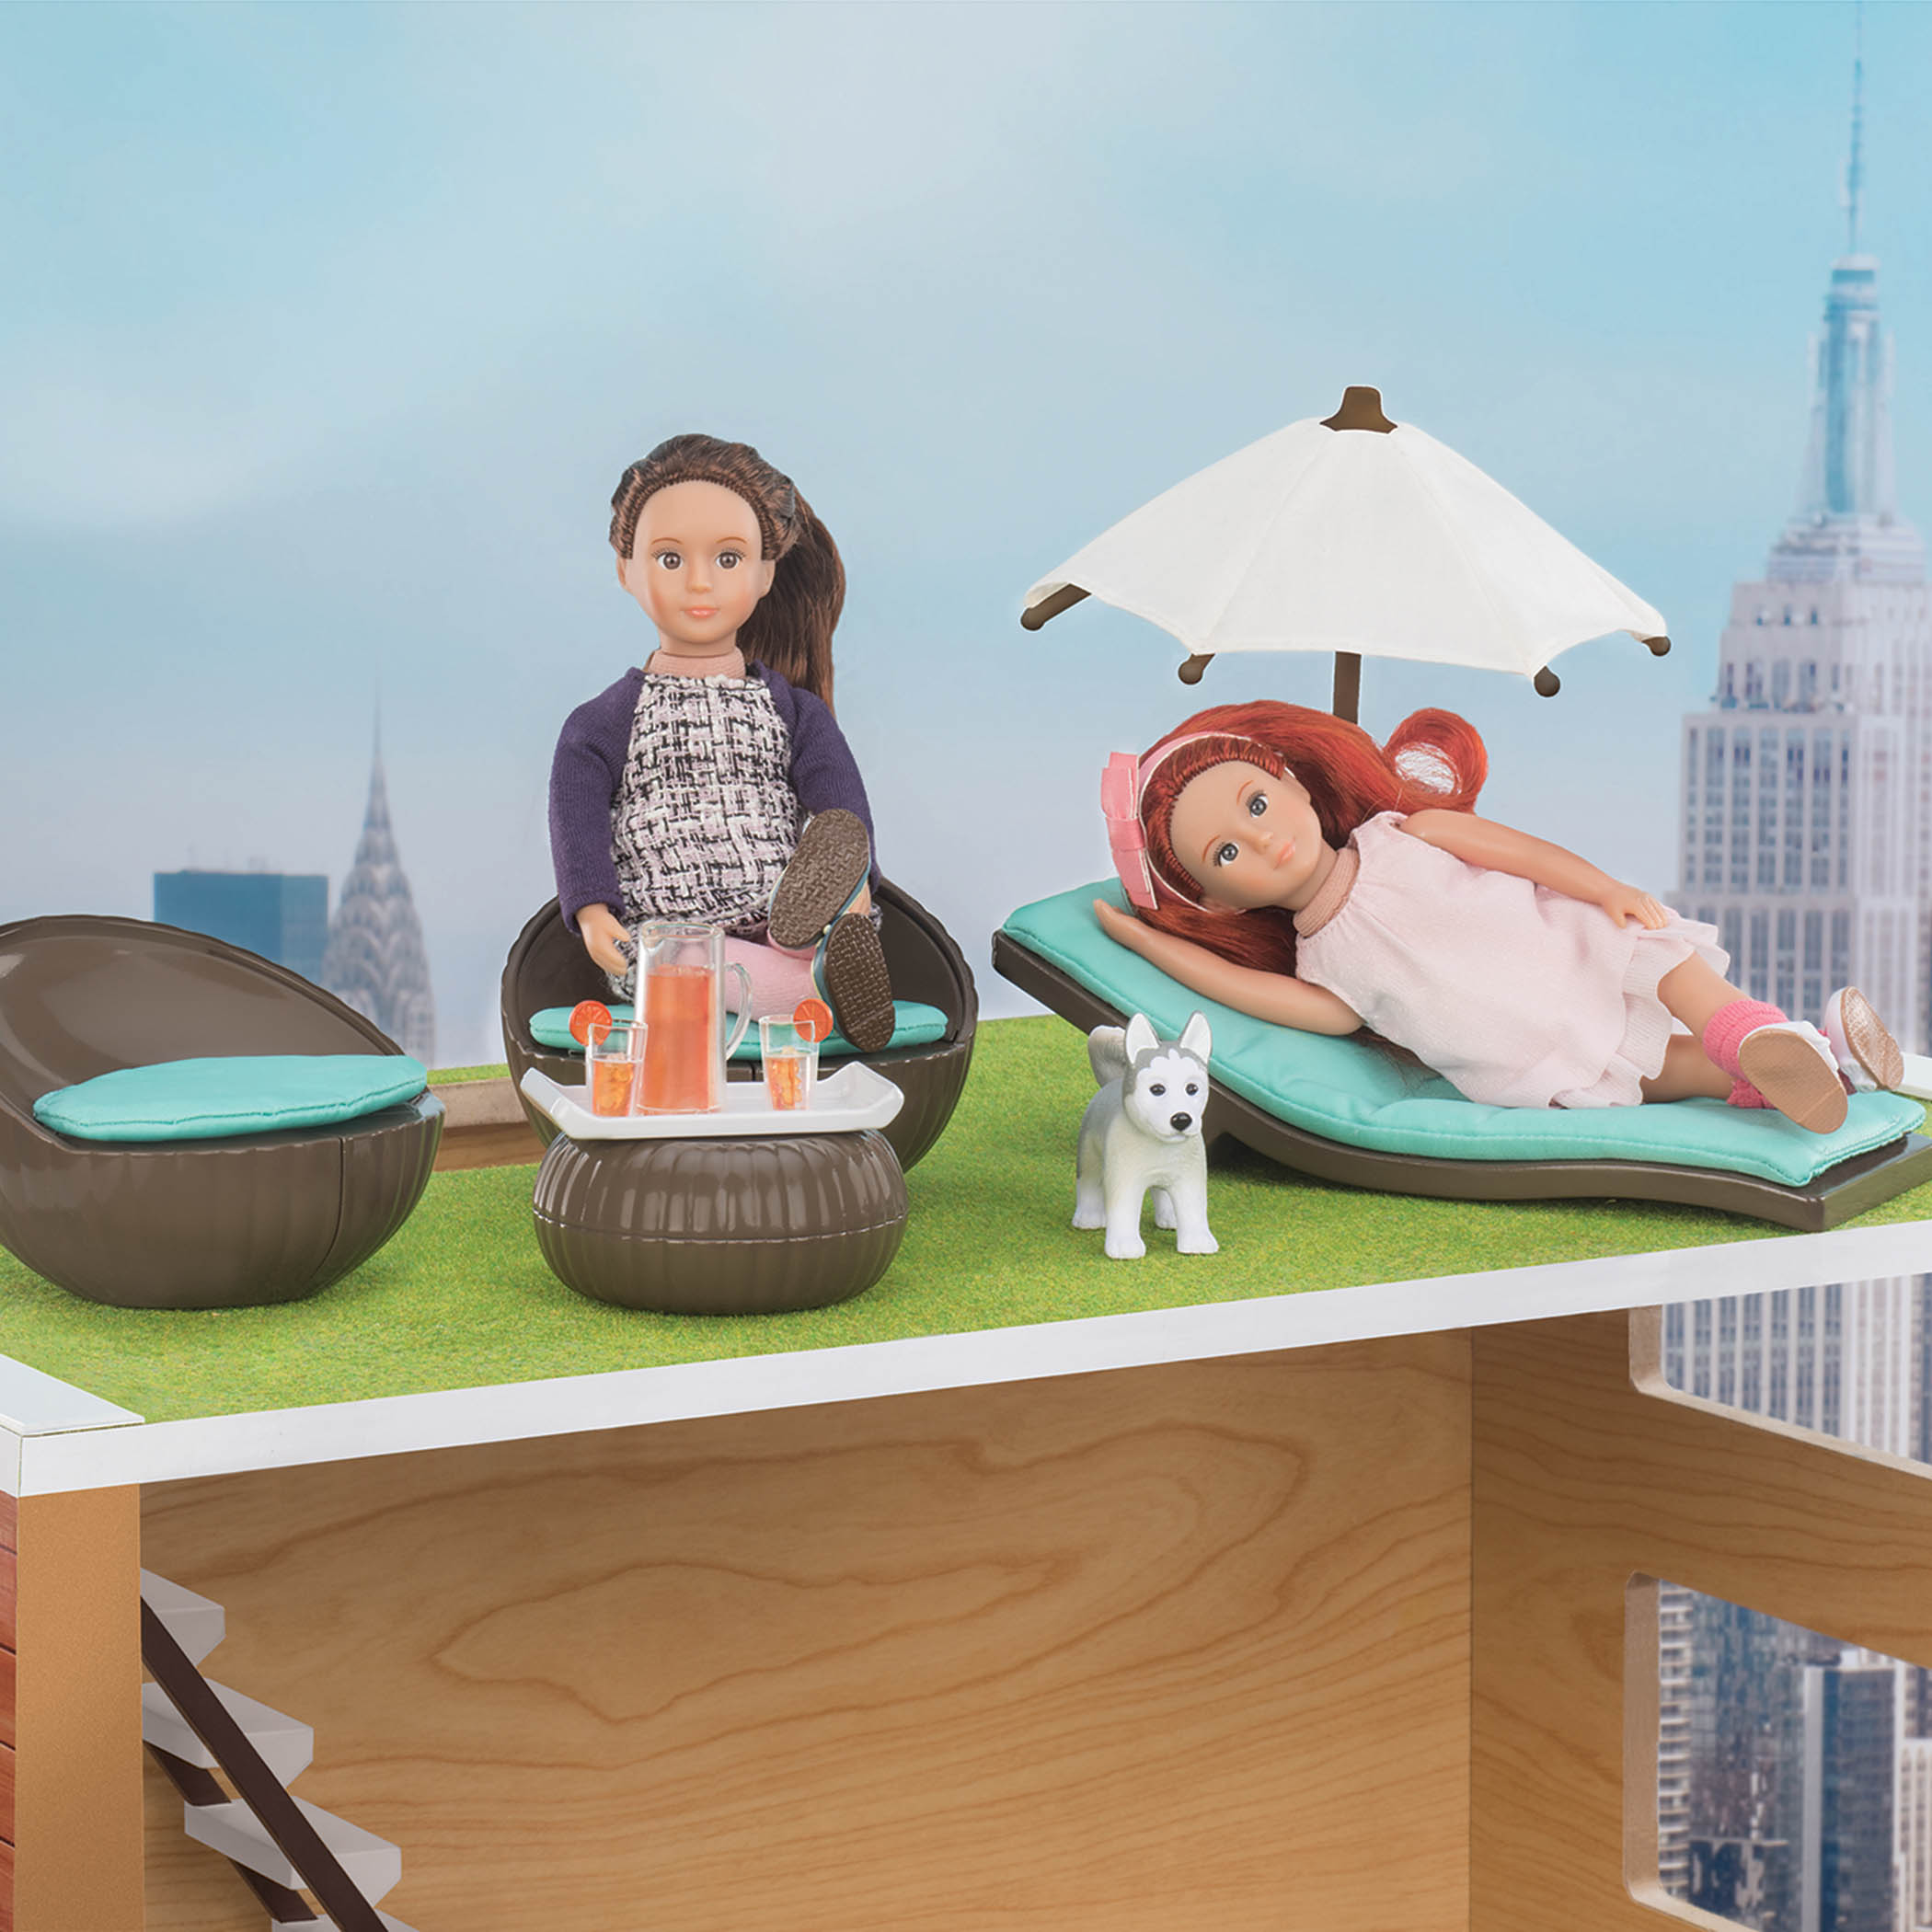 Lori By Our Generation Rooftop Patio Set with Accessories For 6” Battat Doll! 